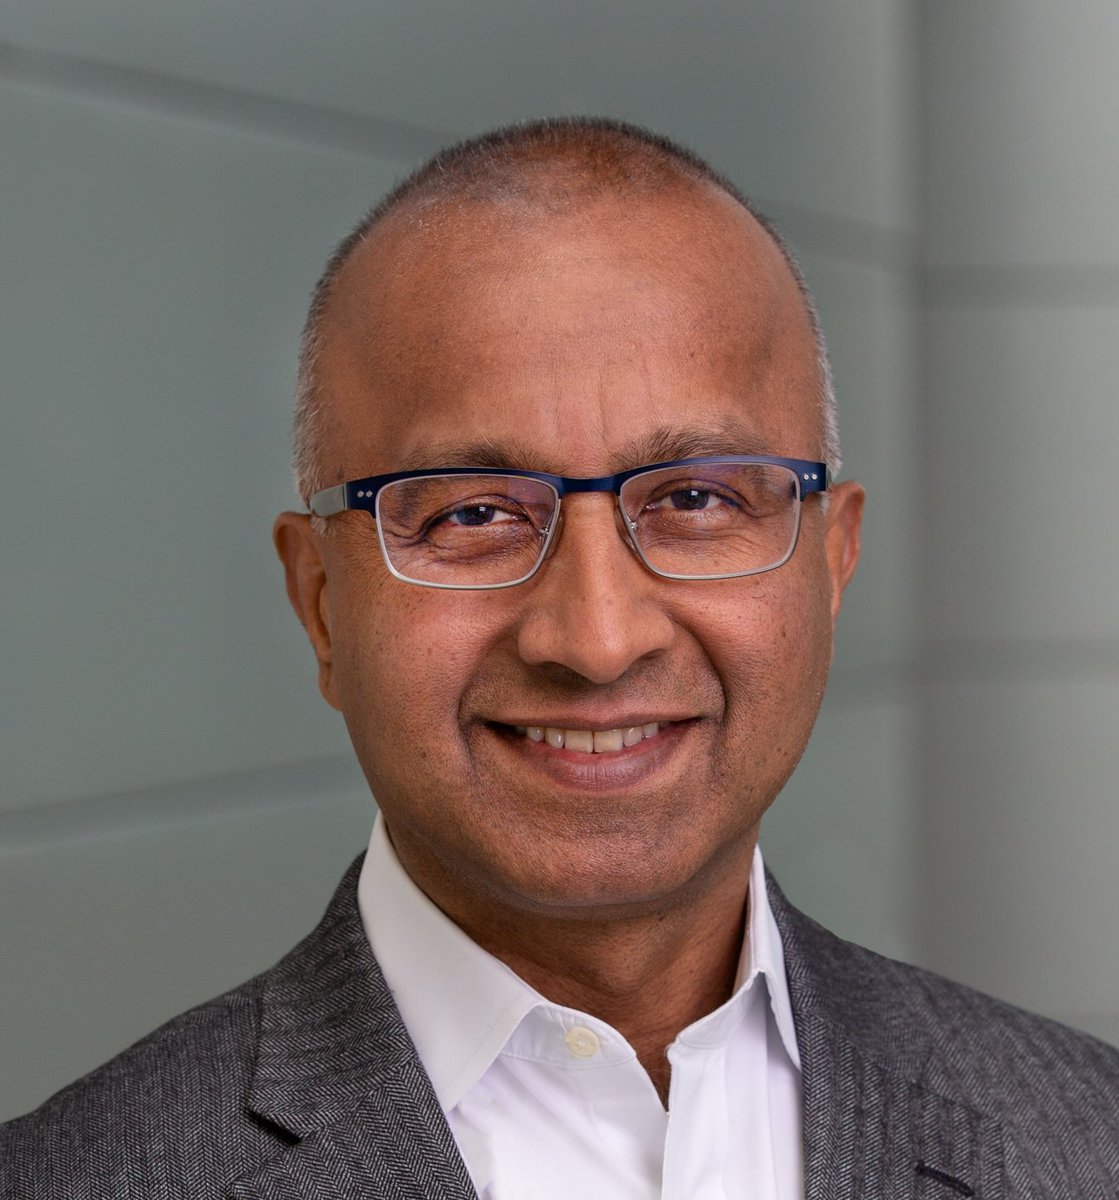 We are thrilled to announce that Dr. Akshay Vaishnaw has joined Atlas as a Venture Partner! We look forward to working with Akshay to build impactful new biotech companies - Welcome Akshay!!